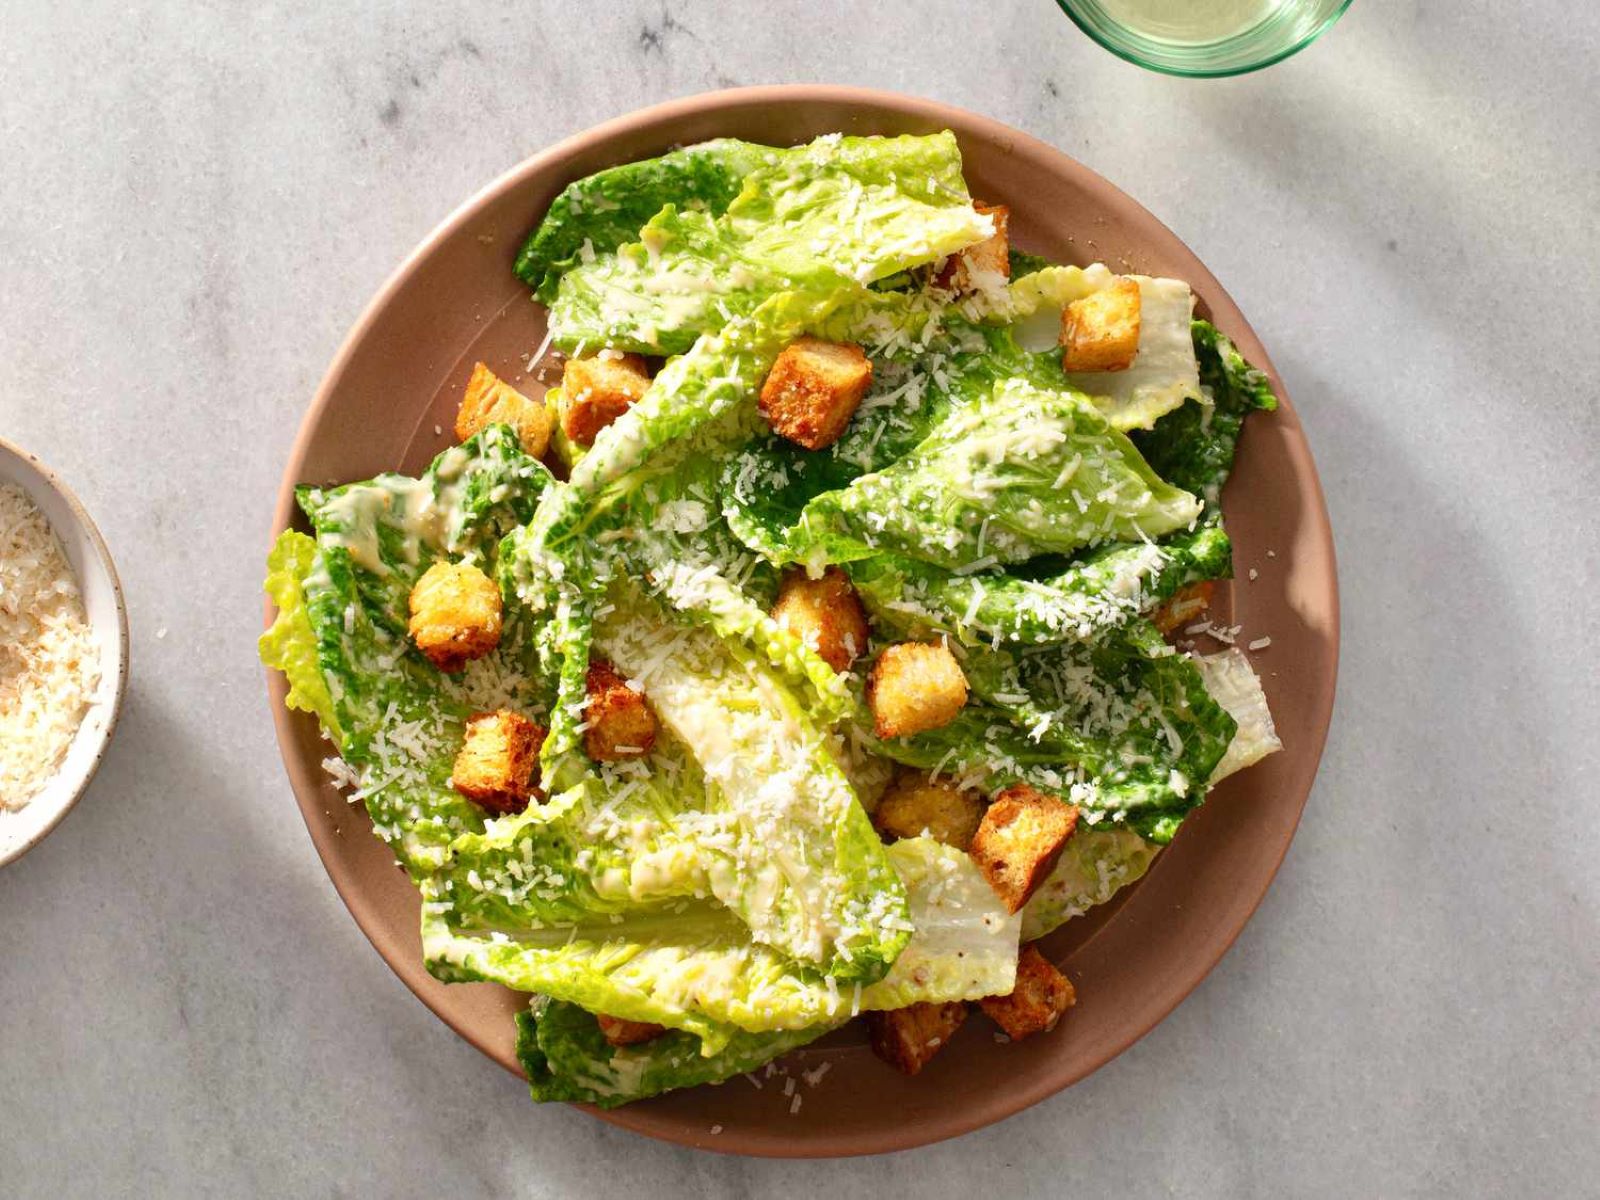 19-nutrition-facts-about-caesar-salad